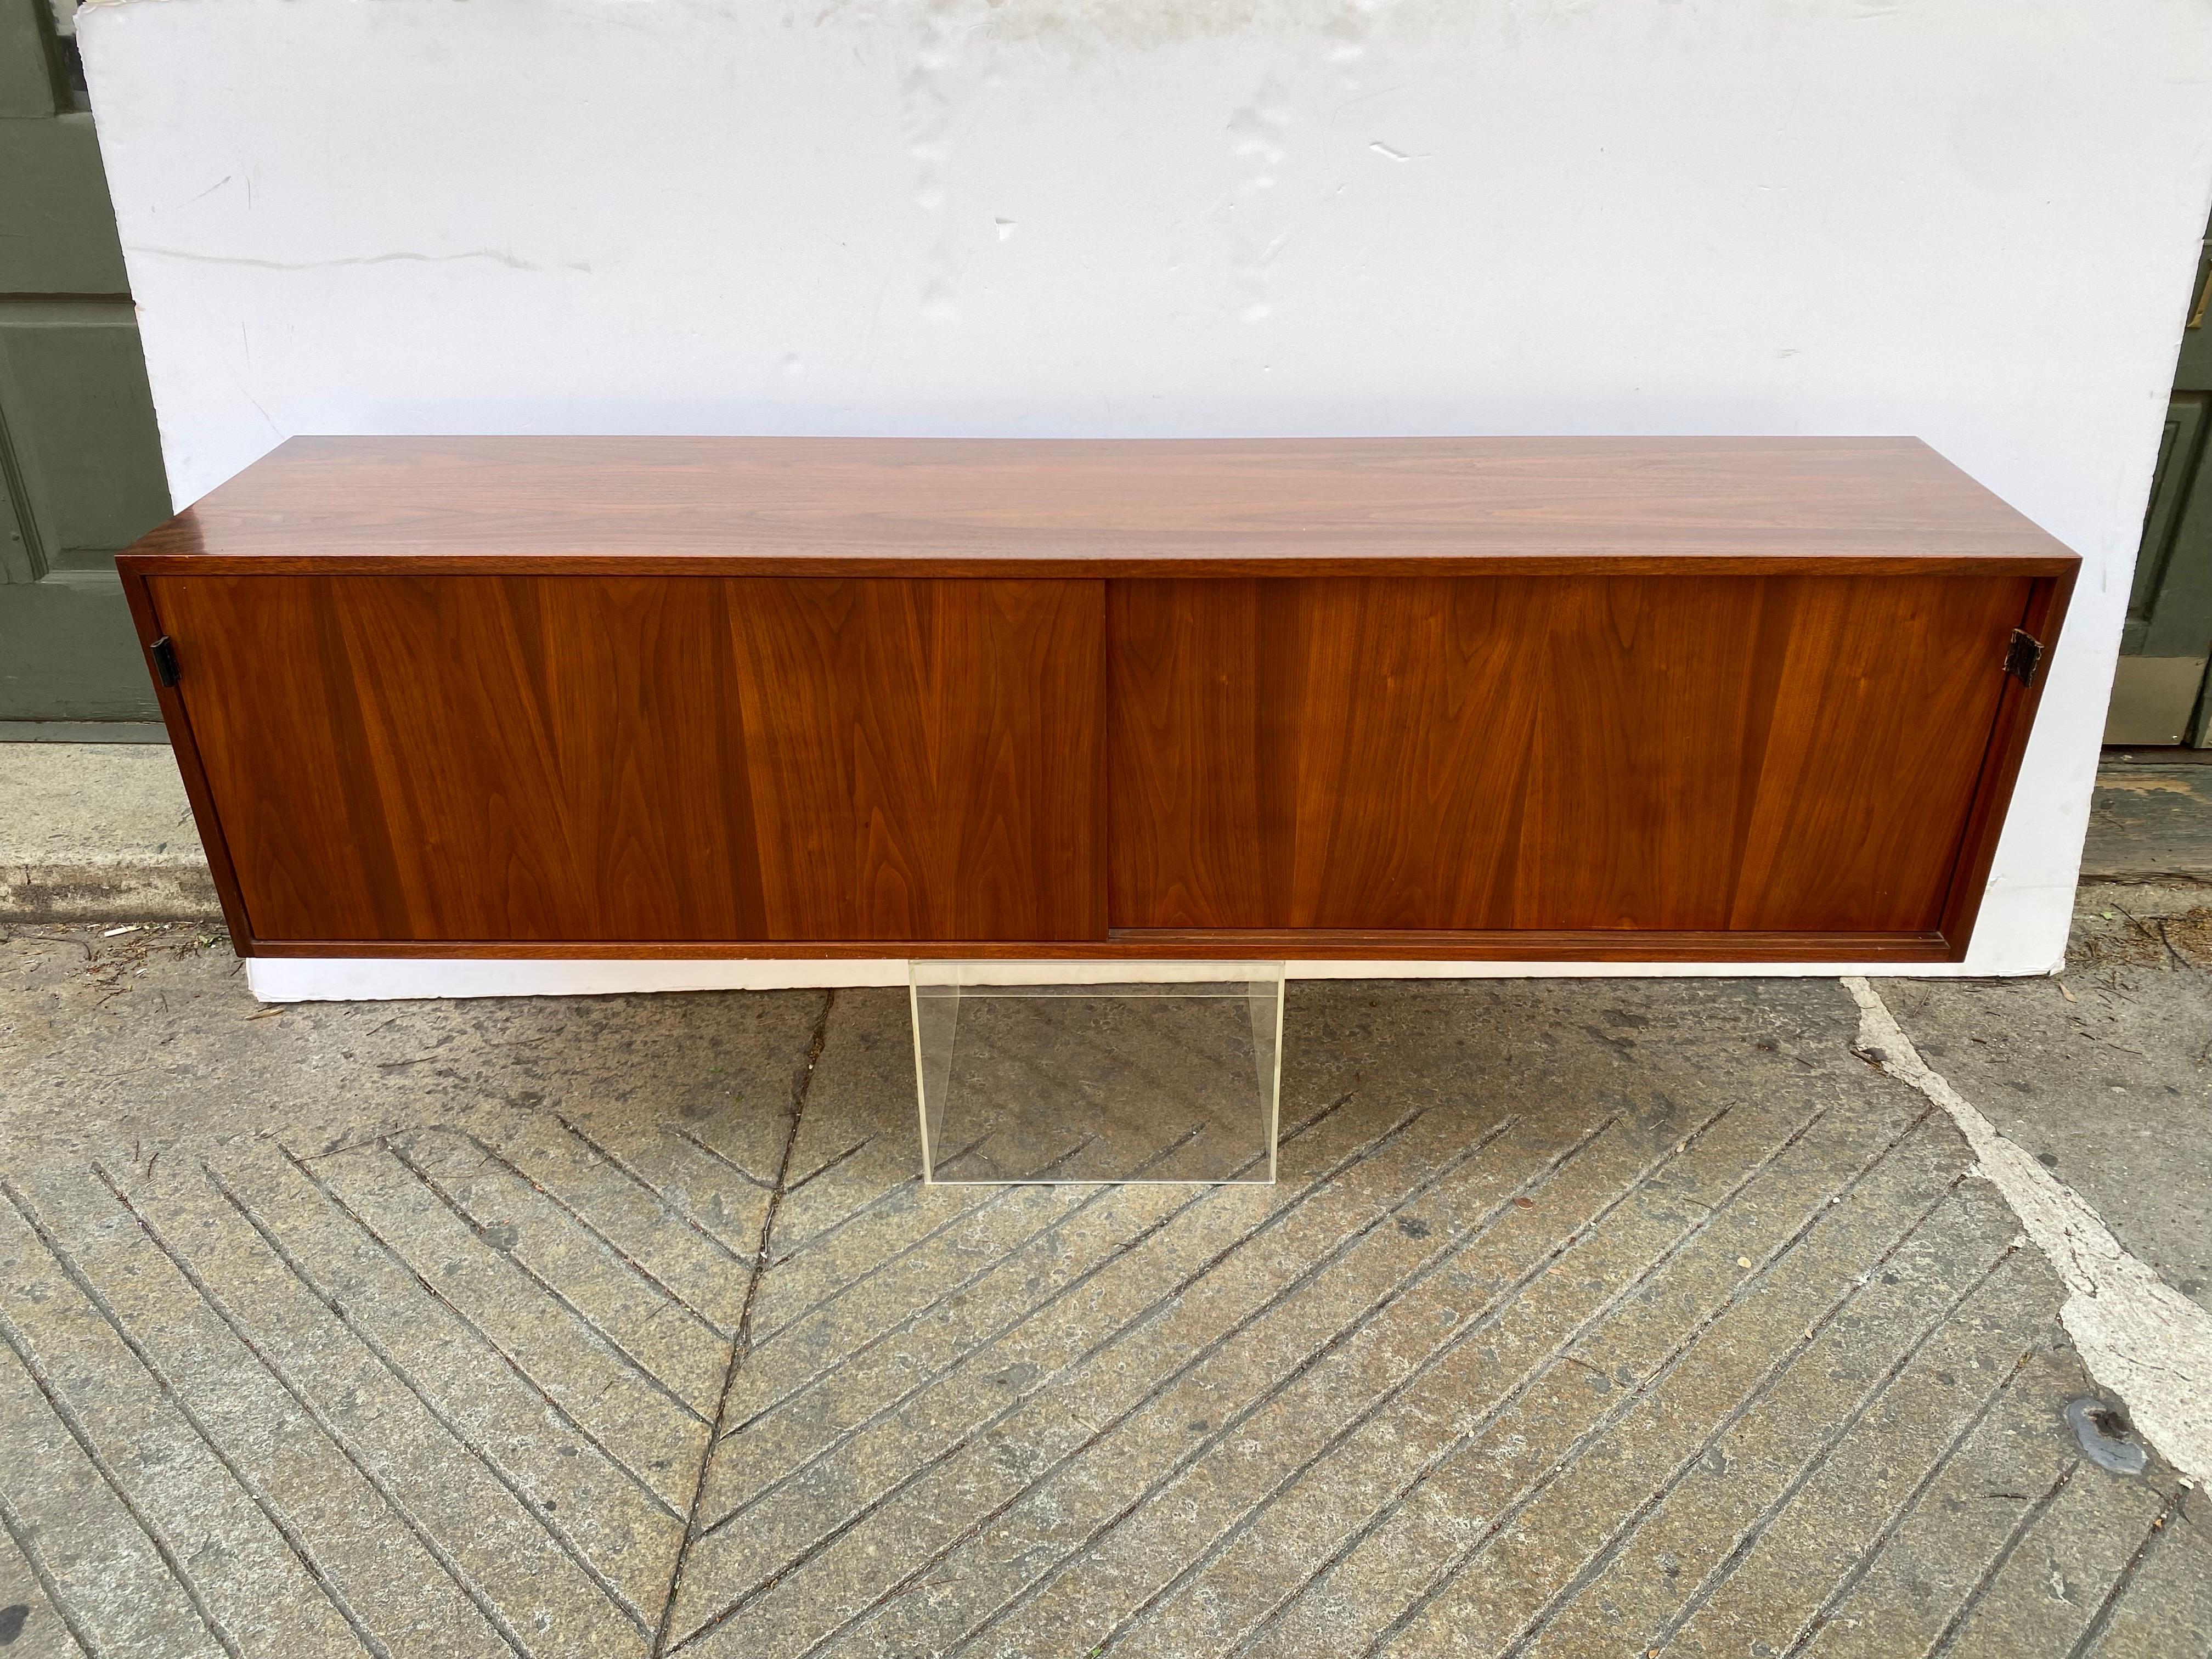 Florence Knoll for Knoll walnut hanging credenza/ cabinet. two doors slide open to reveal shelves and open storage. Iconic Knoll Design, extremely useful and good looking. Original leather pulls in nice shape. Top has been refinished, original paint